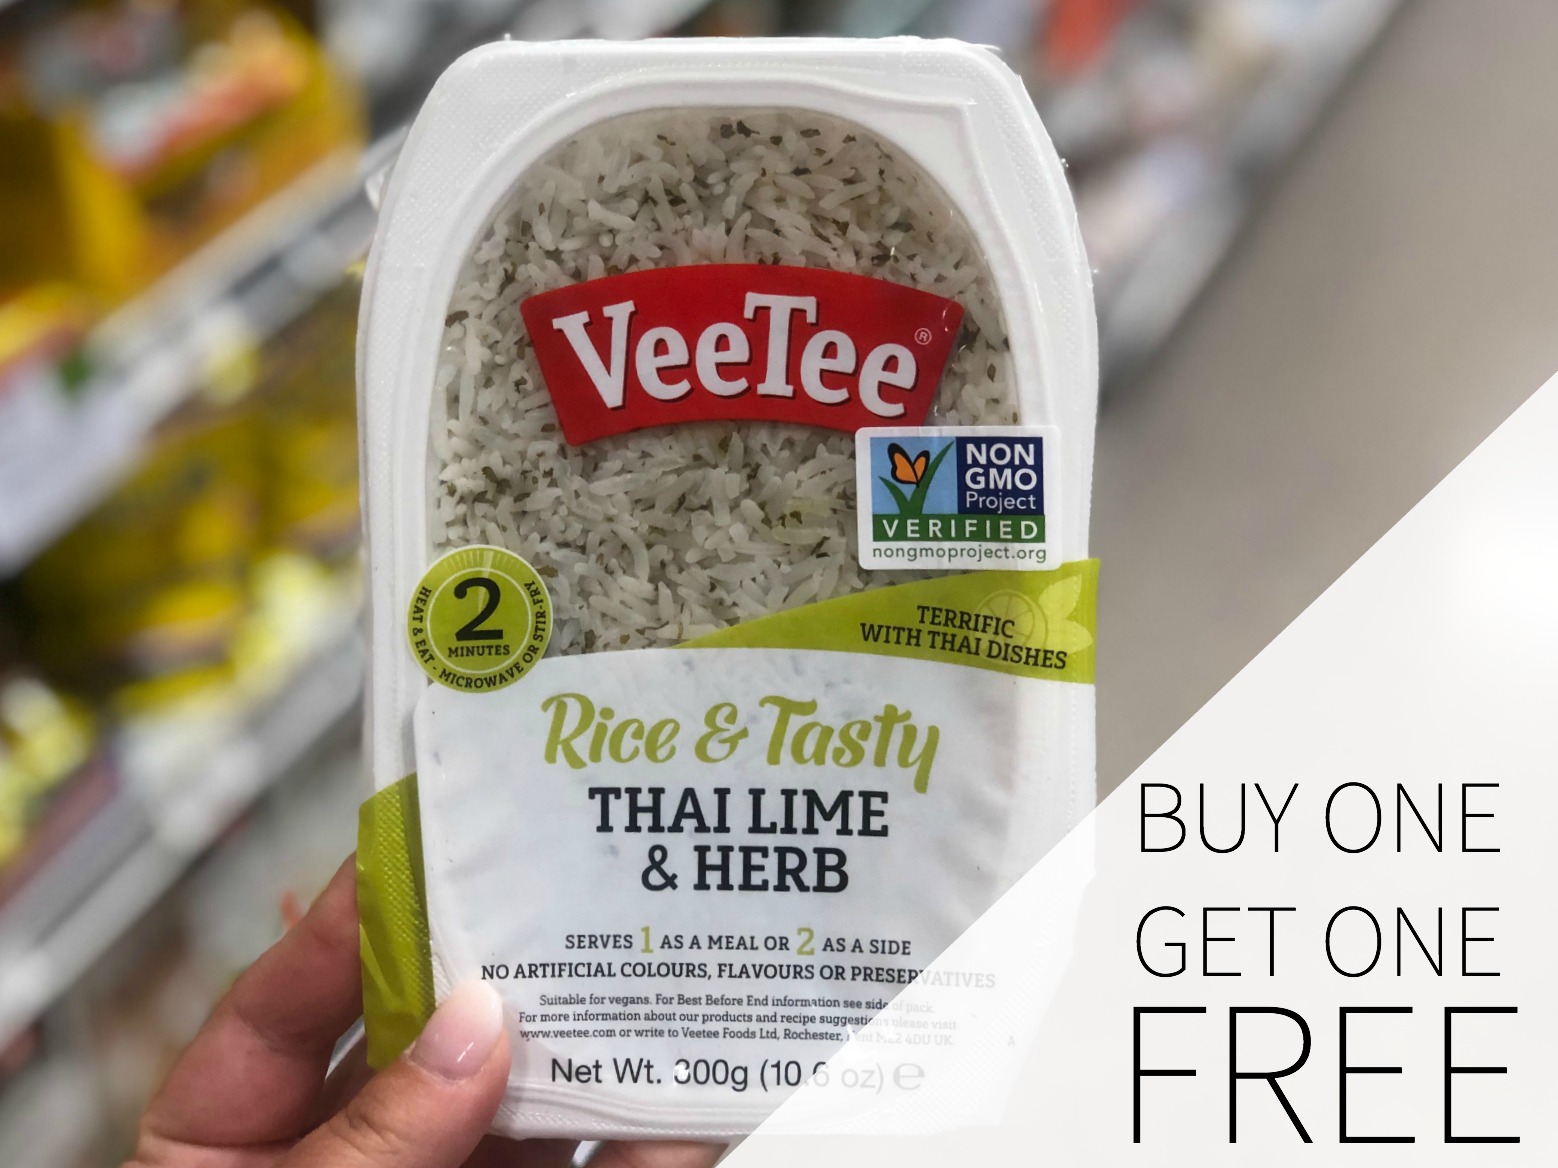 Veetee Rice Is On Sale Buy One, Get One FREE At Publix on I Heart Publix 1